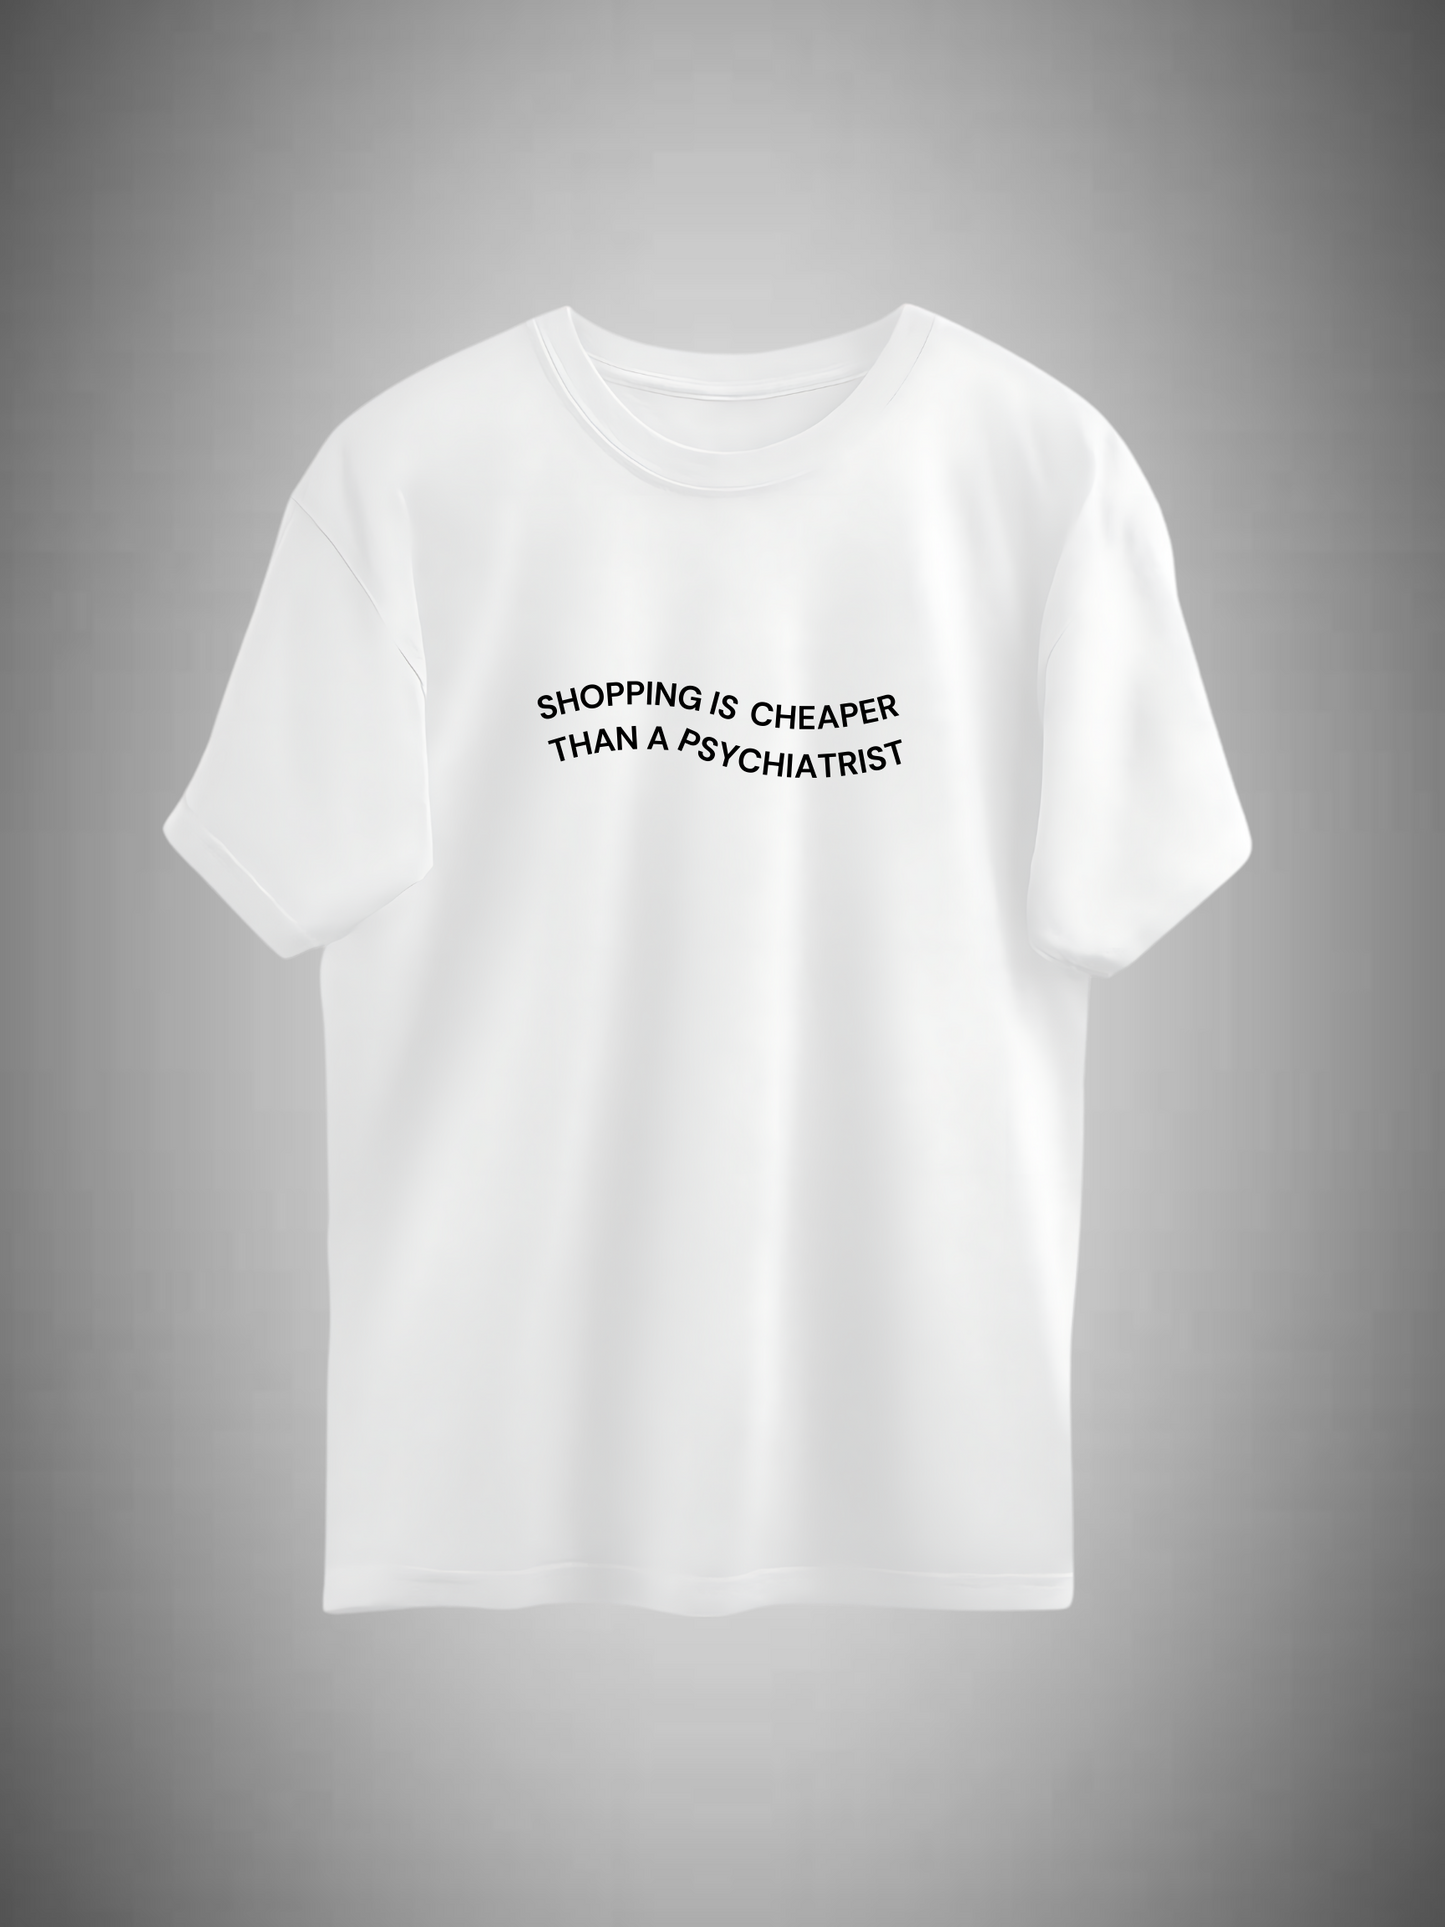 Shopping be a Therapy T-shirt